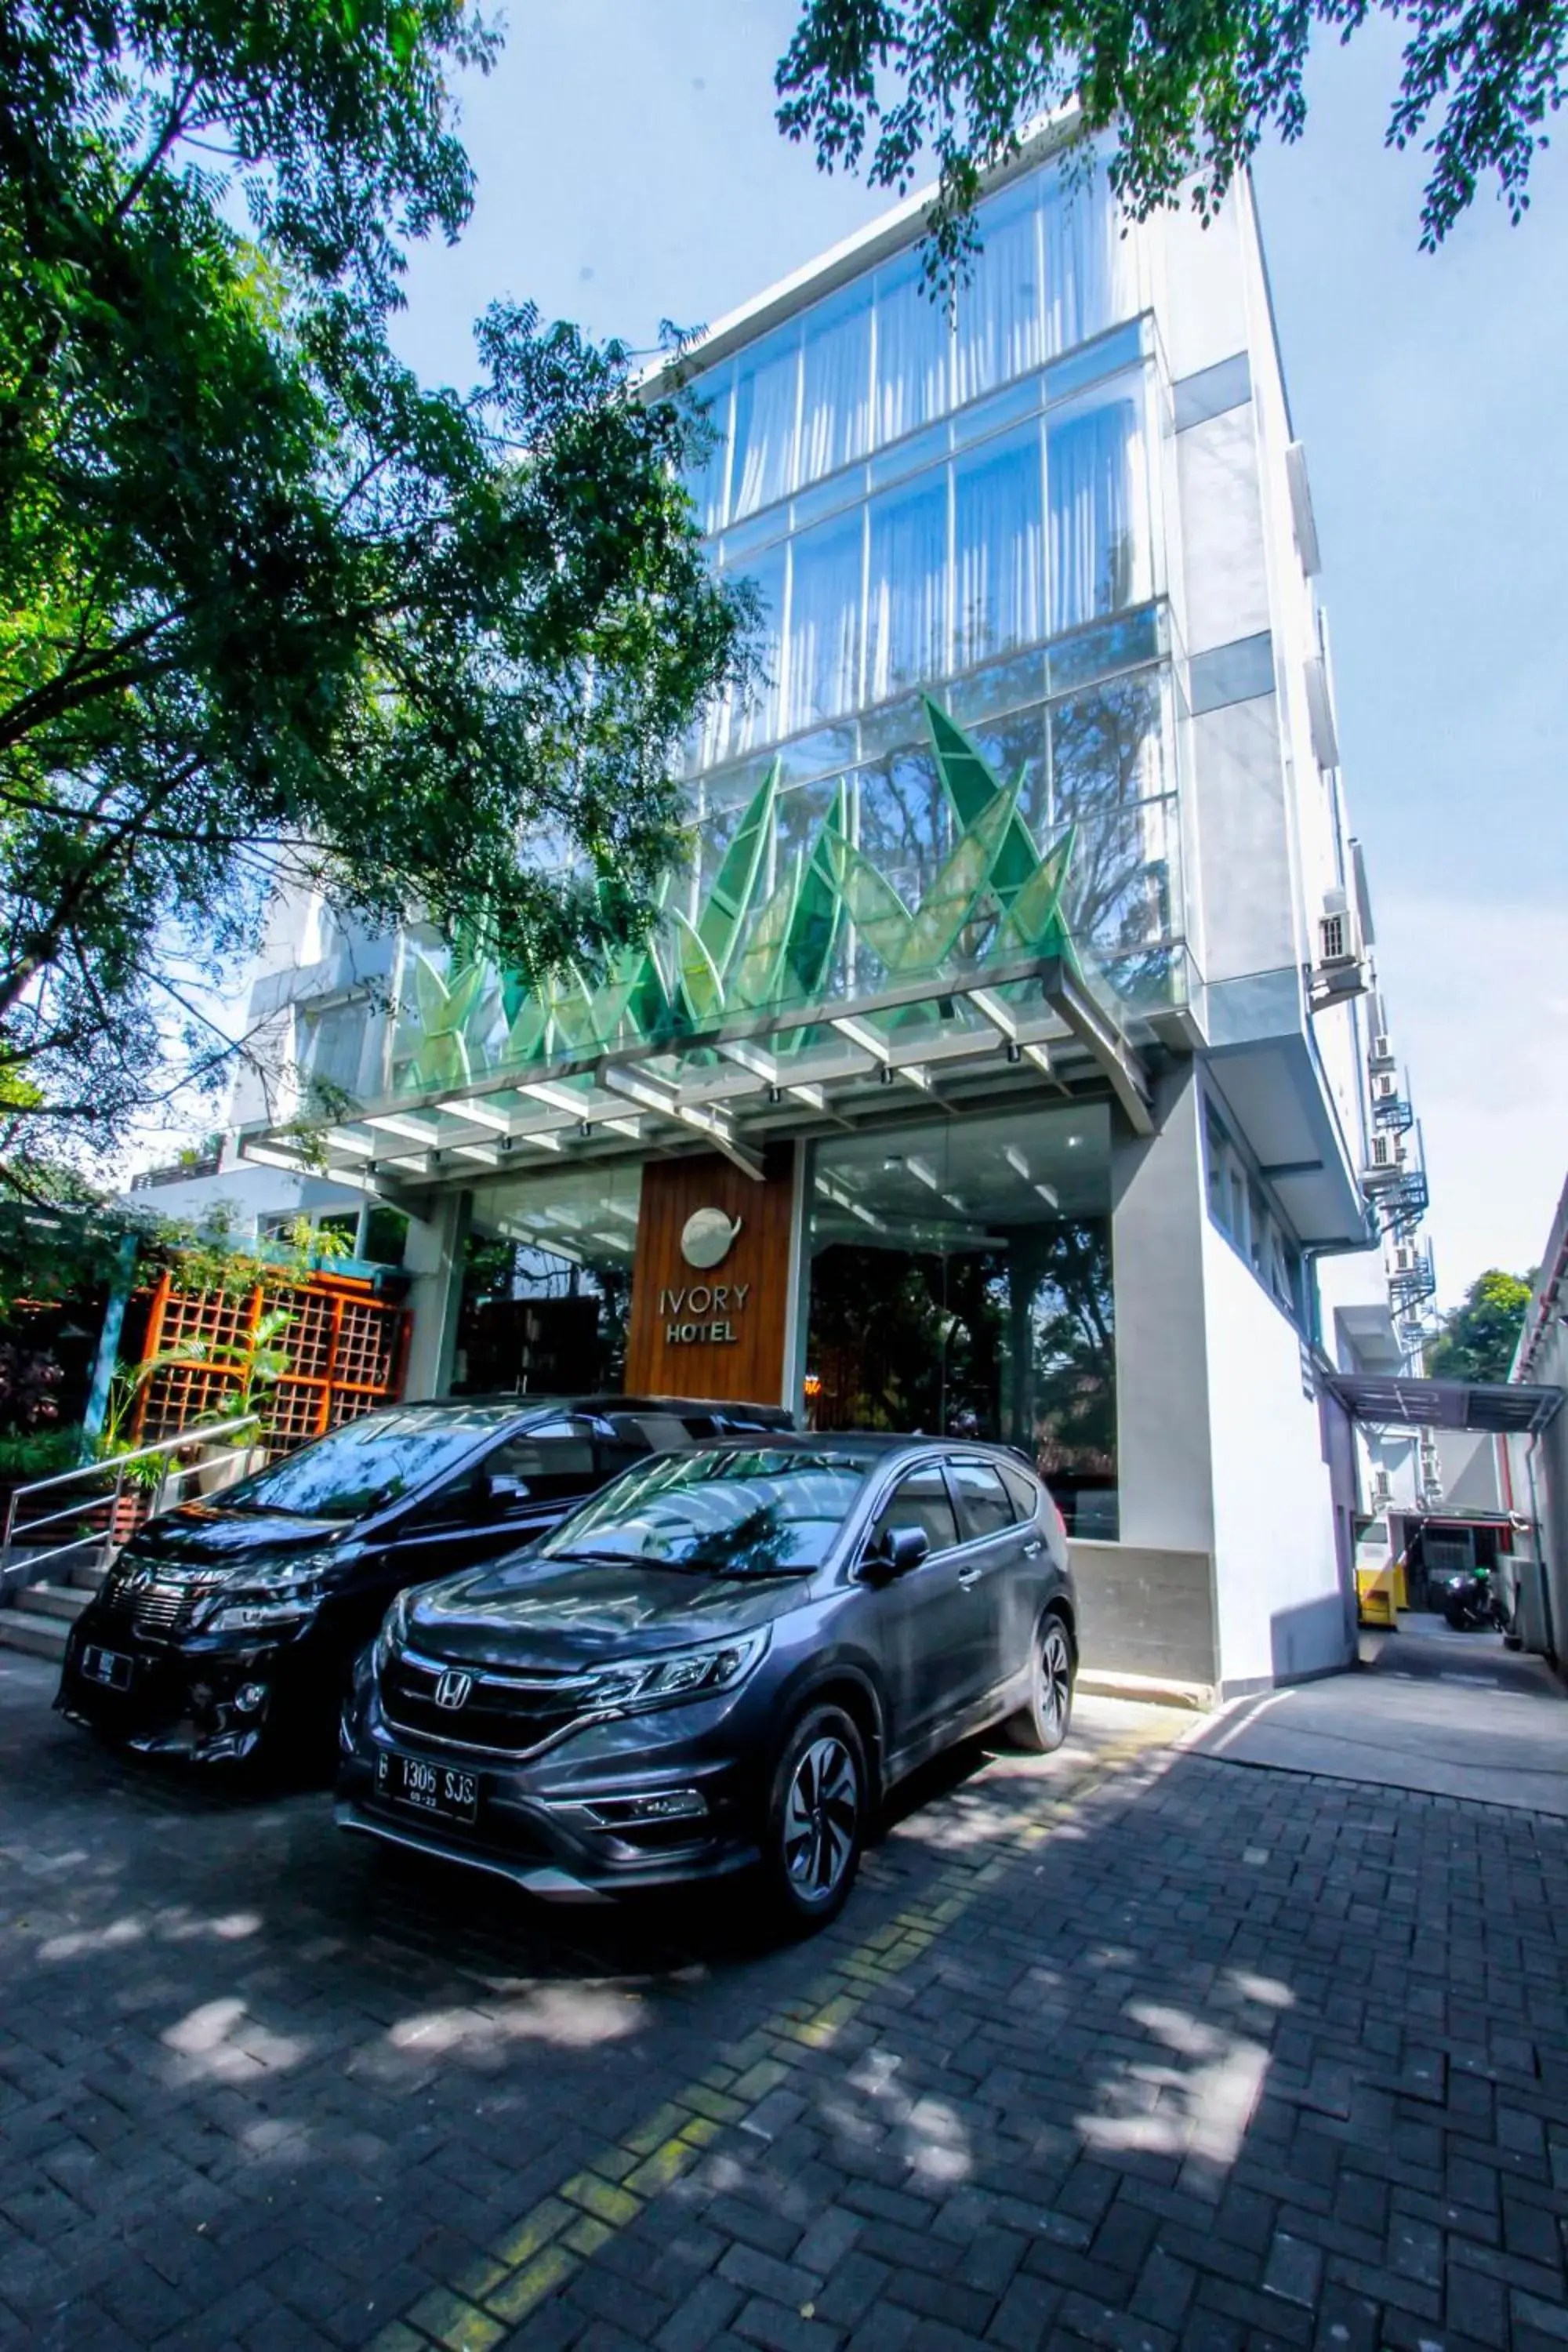 Property Building in Ivory Hotel Bandung